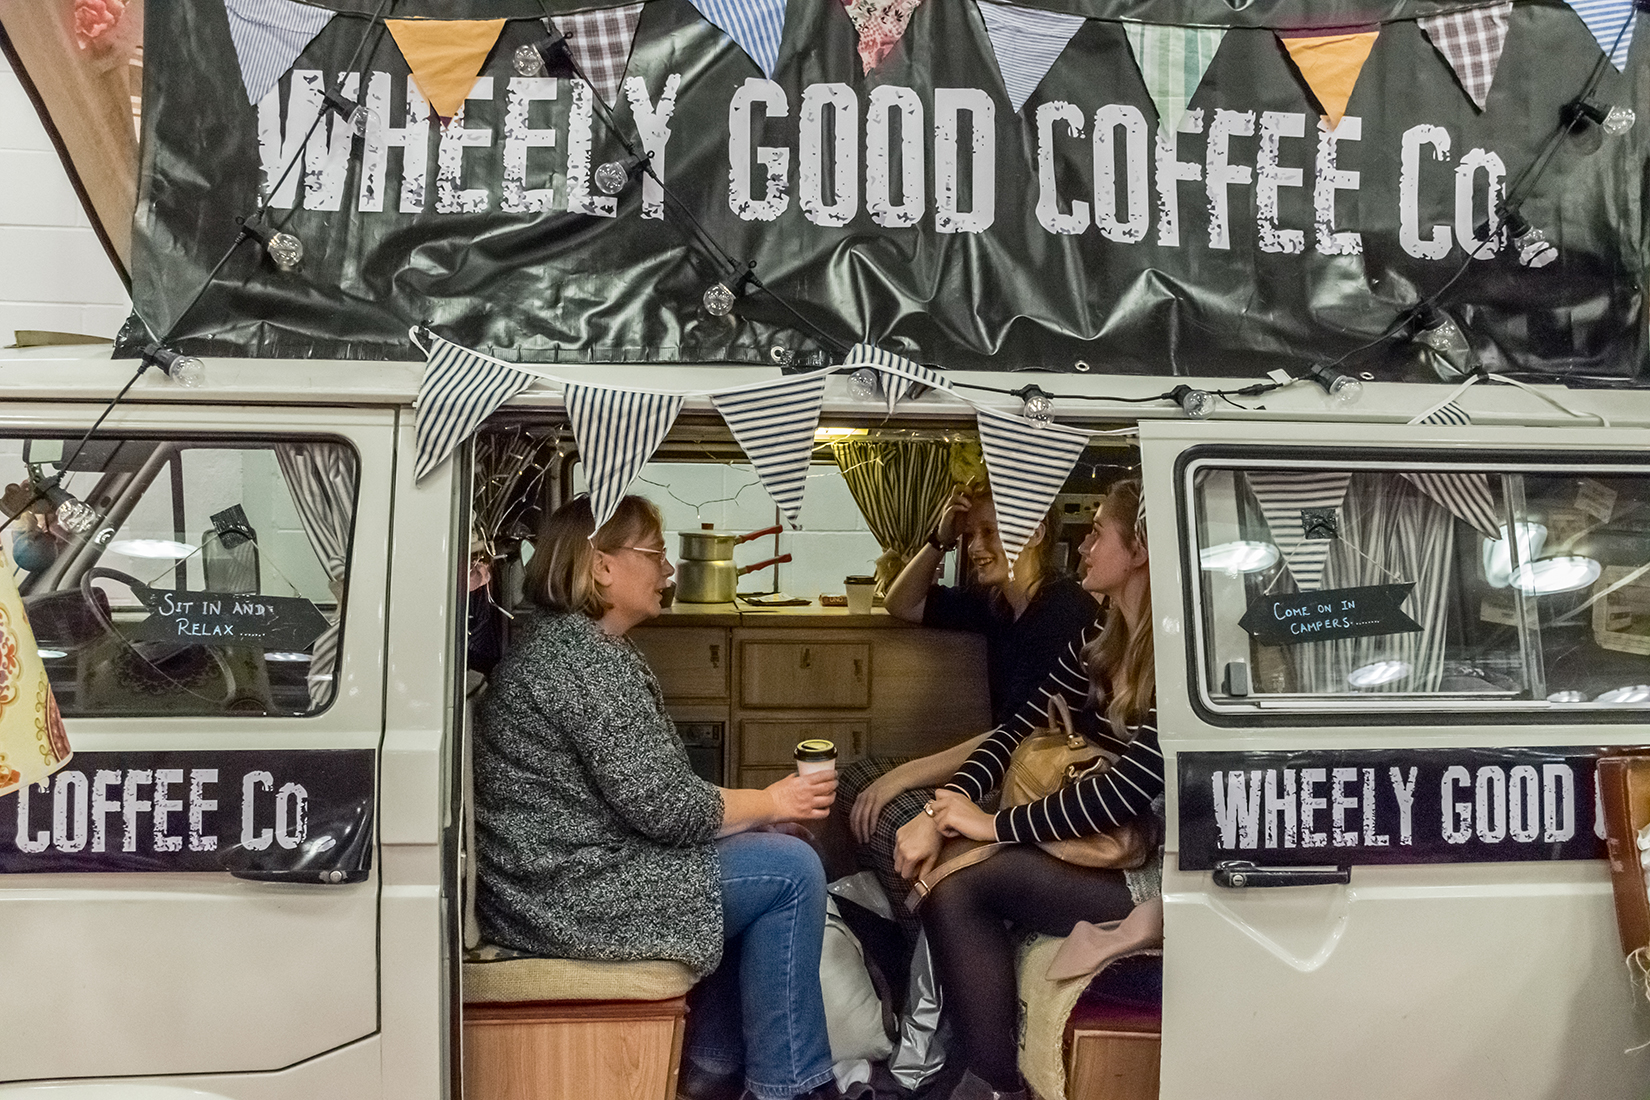 Campers at the Wheely Good Coffee Co